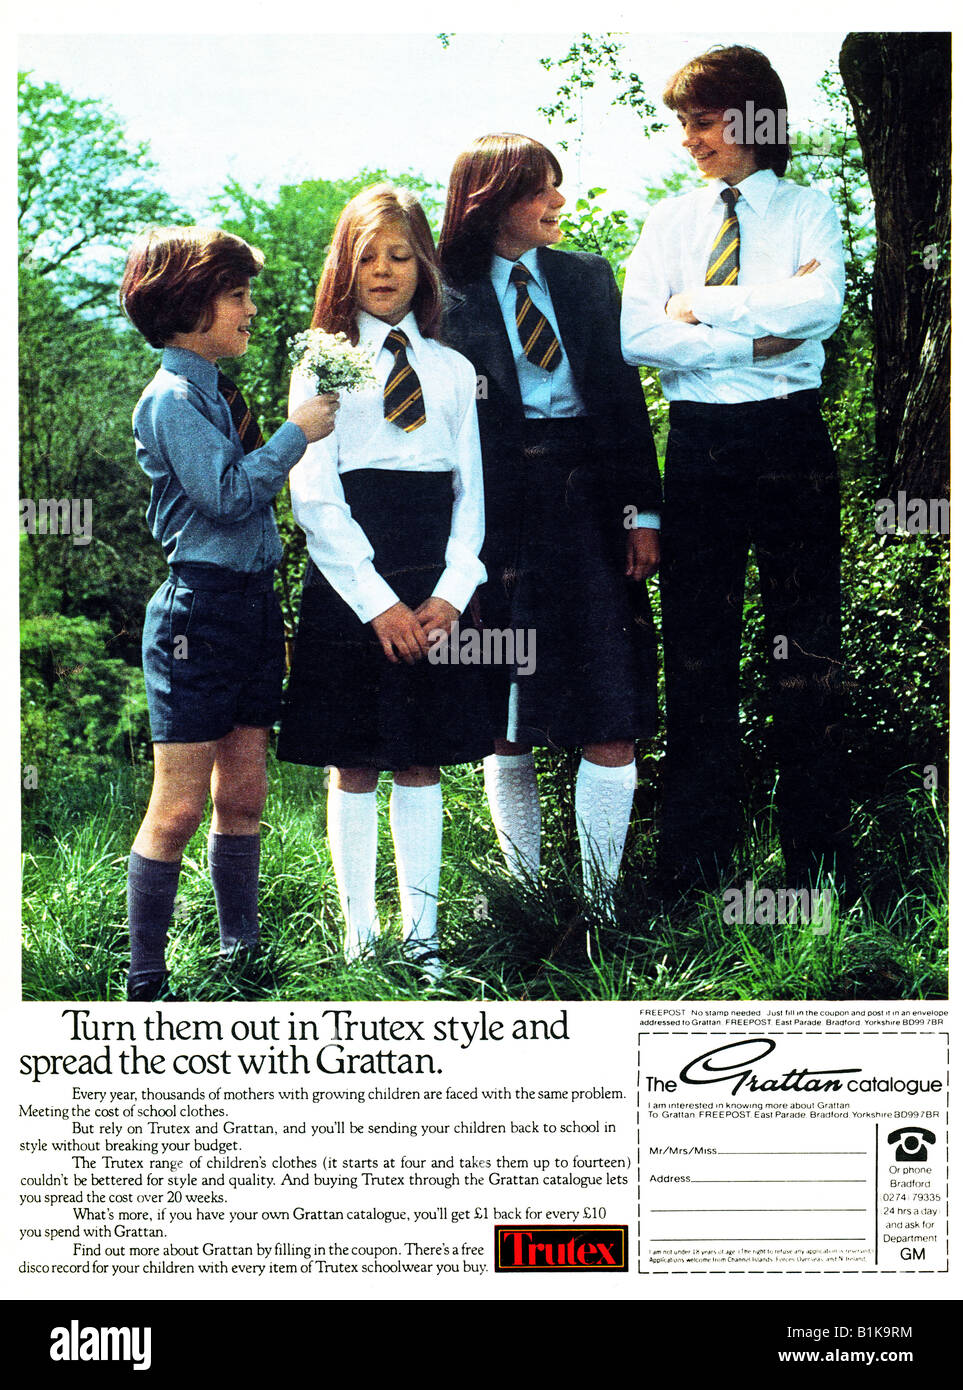 1970s Catalogue Shopping Gratton Catalogue featuring Trutex Children's clothes advertisement 1978 FOR EDITORIAL USE ONLY Stock Photo